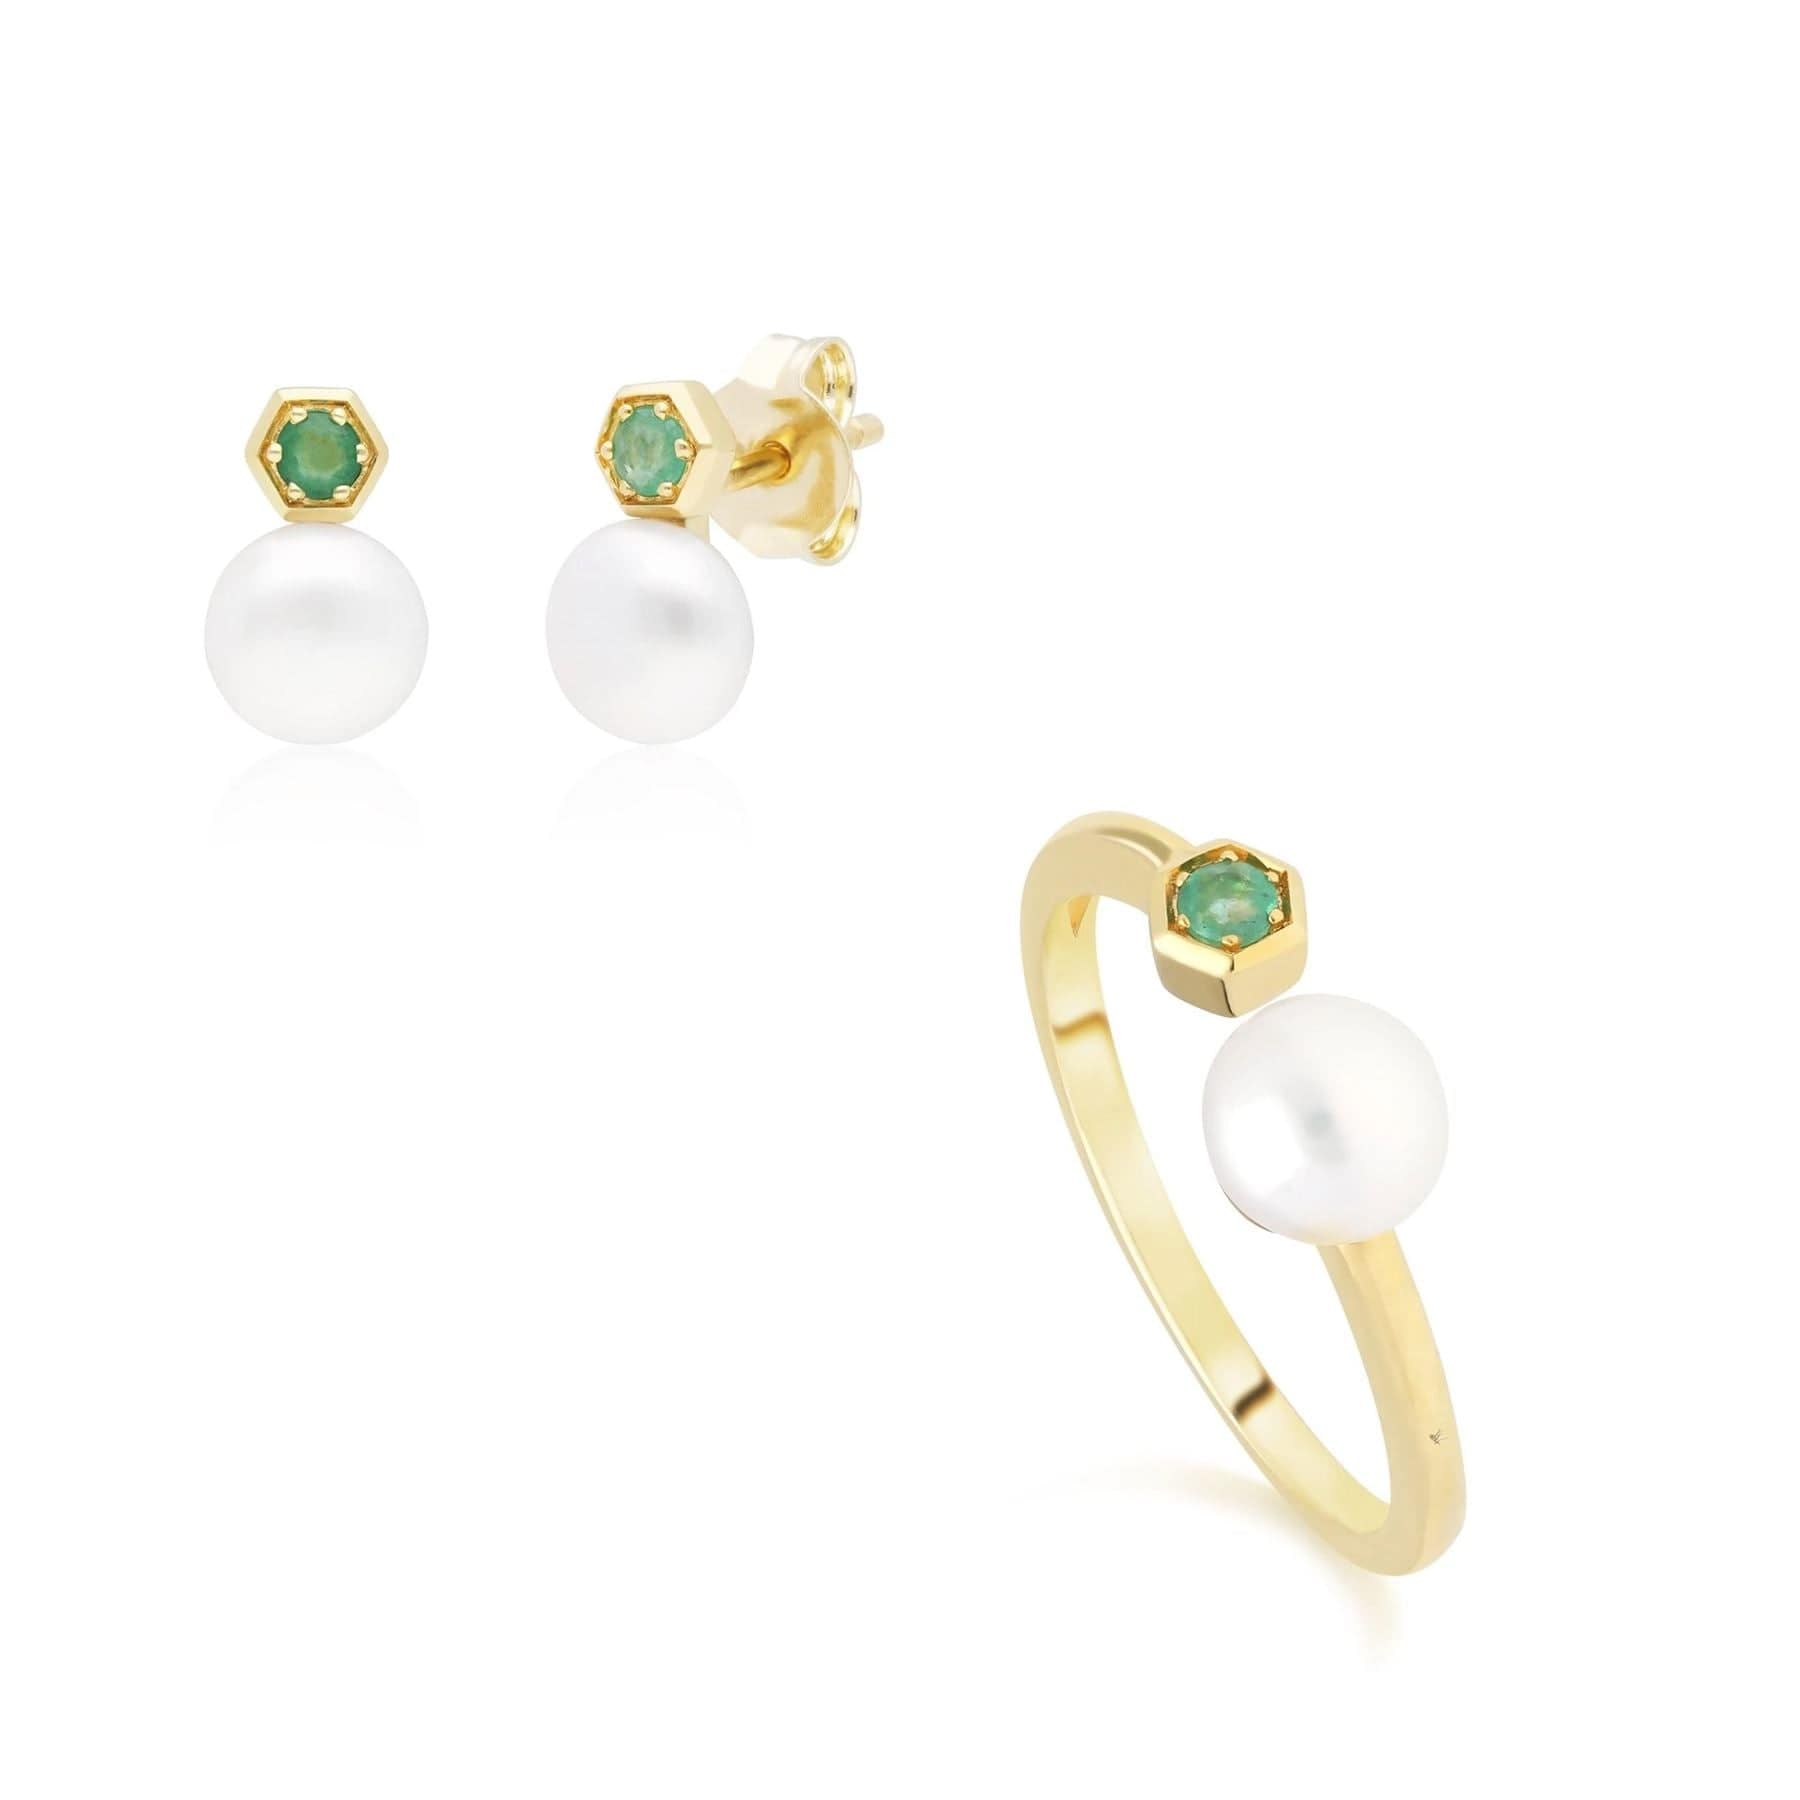 135E1633019-135R1840019 Modern Pearl & Emerald Earring & Ring Set in 9ct Gold 1